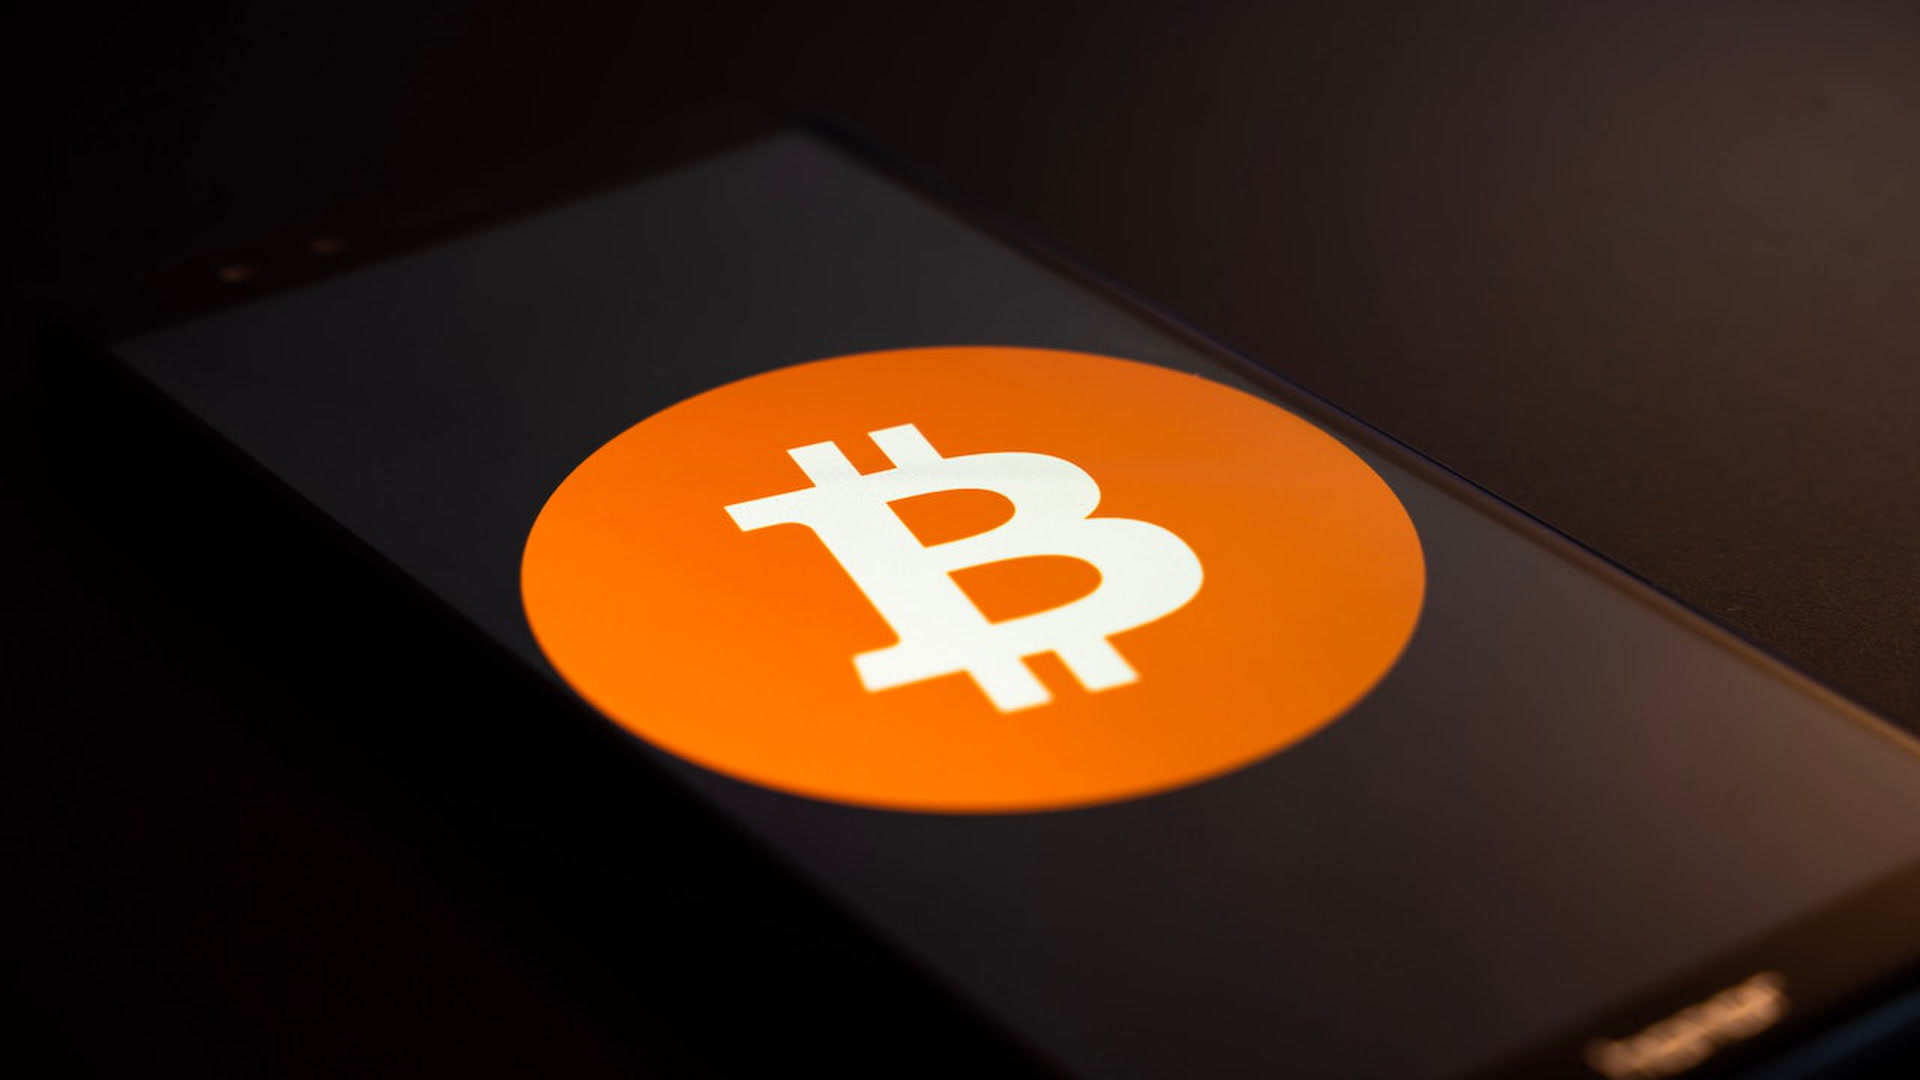 Setting up your iPhone for Bitcoin mining